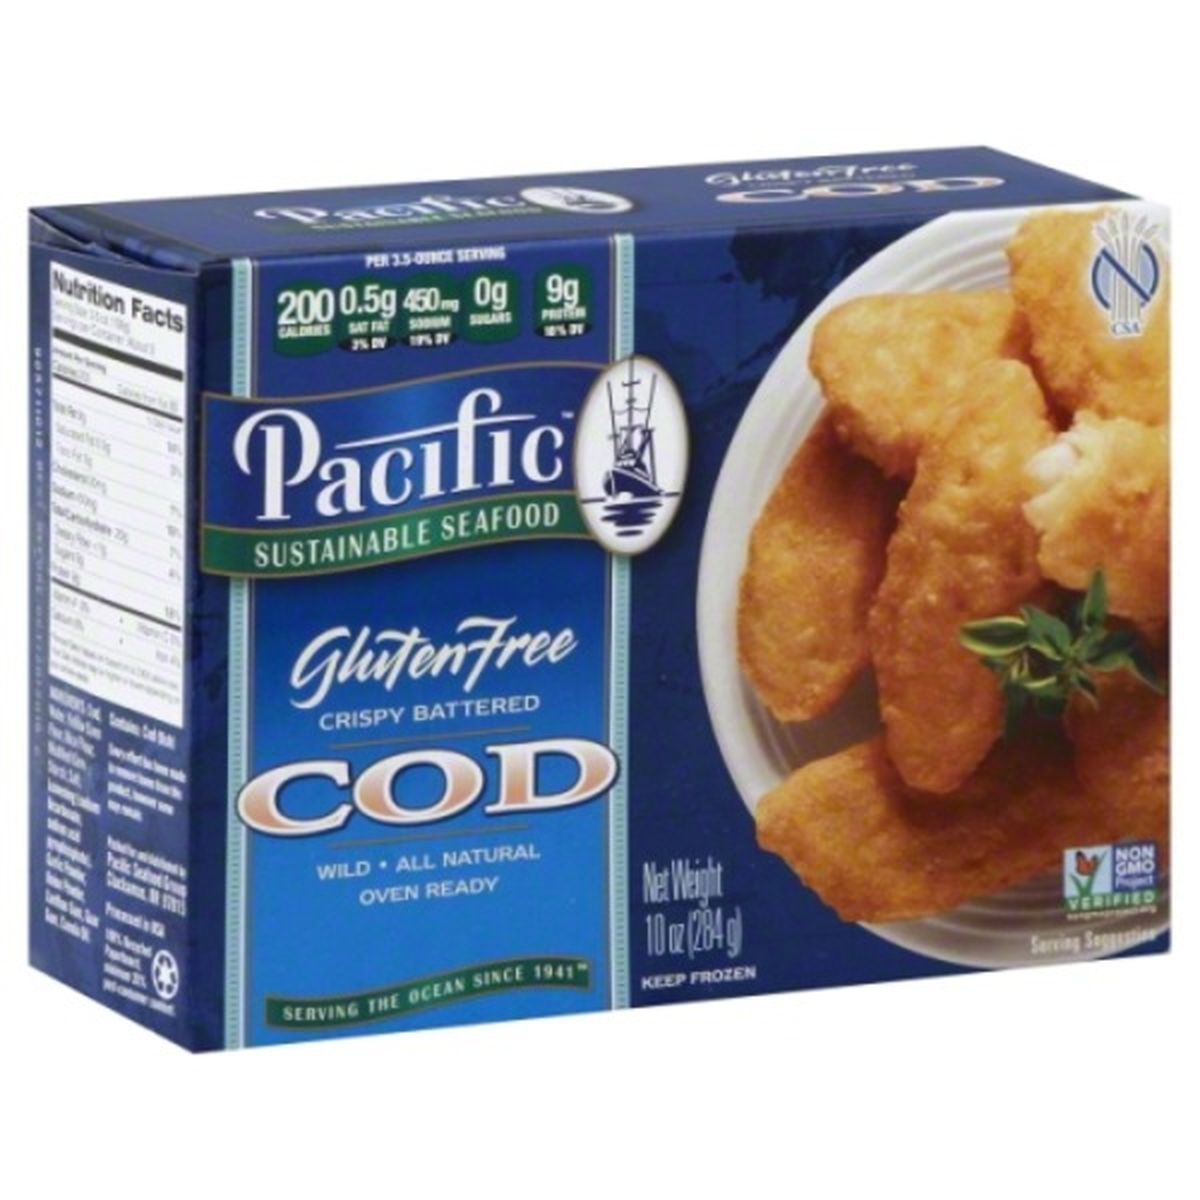 Calories in Pacific Sustainable Seafood Cod, Gluten Free, Crispy Battered